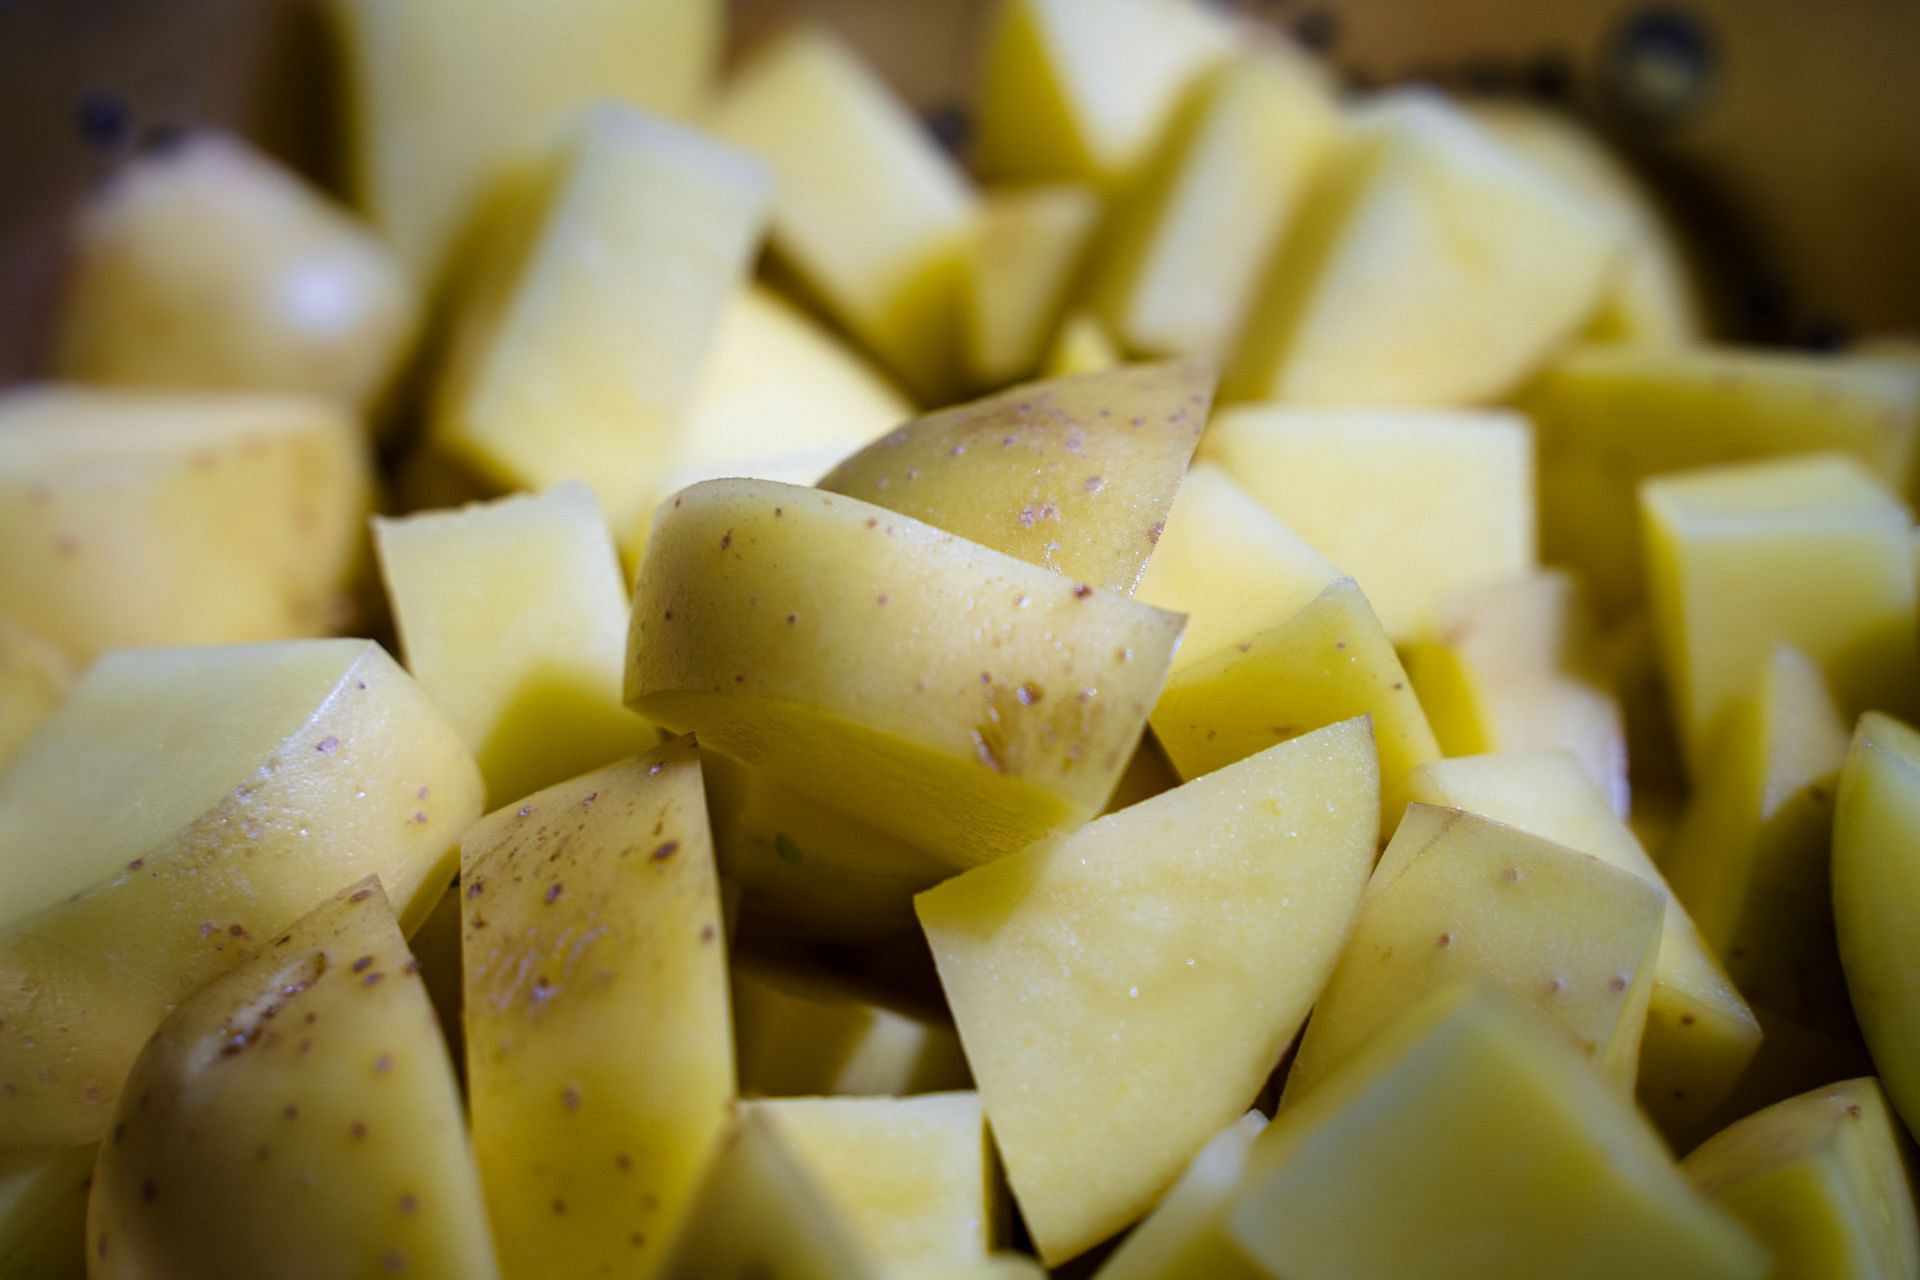 Are potatoes healthy? They contain several nutrients. (Image via Unsplash/Gilberto Olimpio)